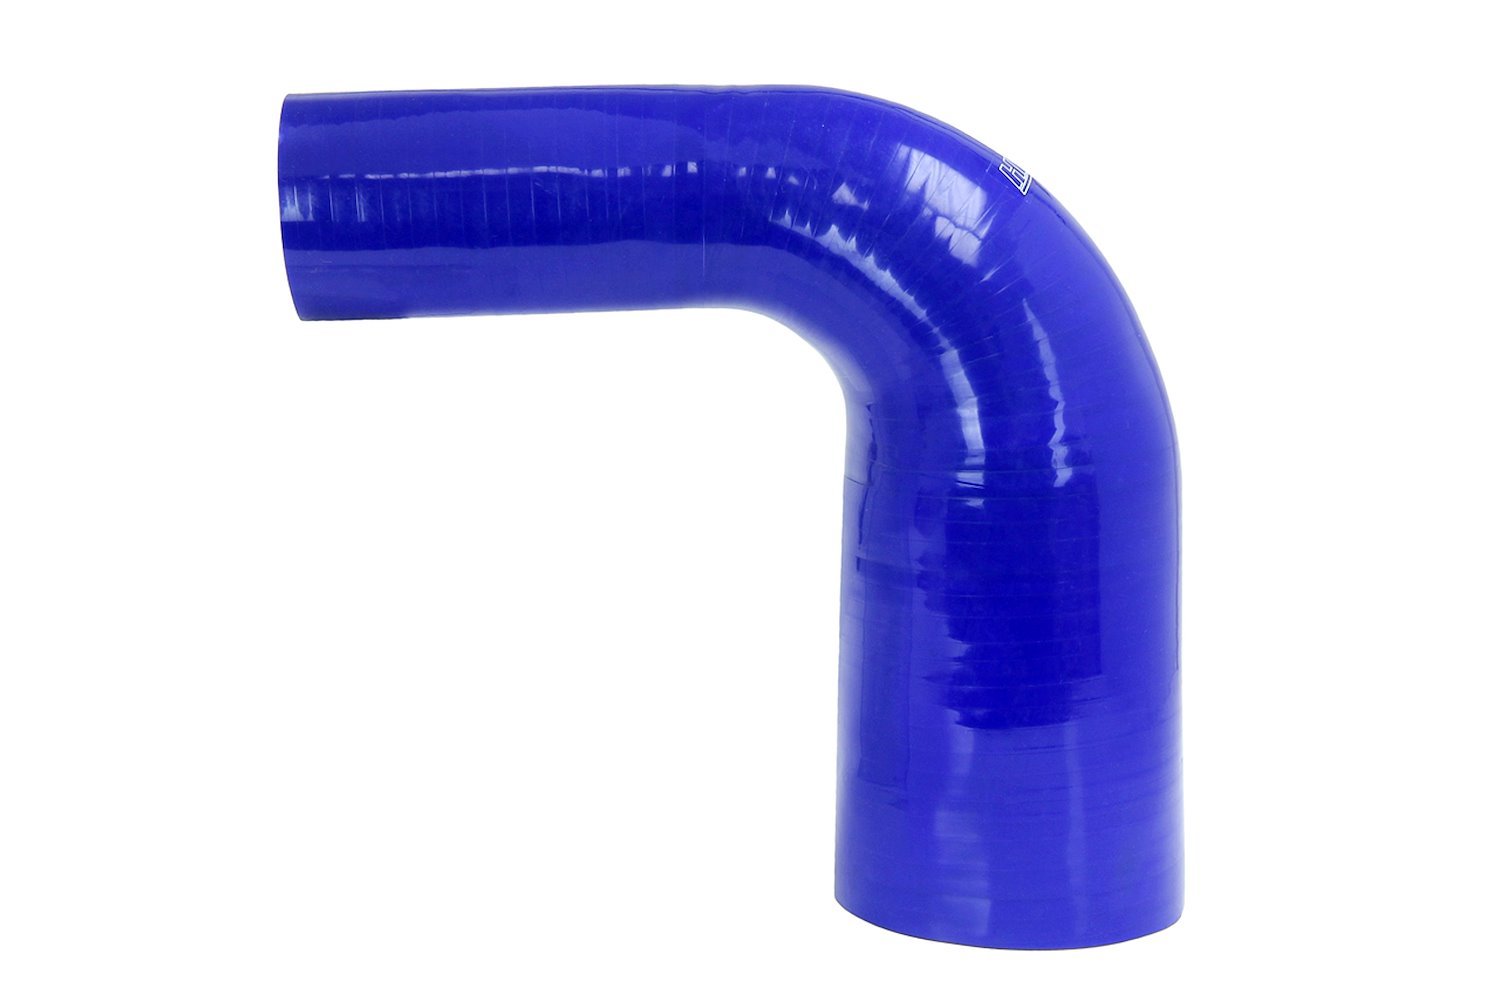 HTSER90-238-275-BLUE Silicone 90-Degree Elbow Hose, High-Temp 4-Ply Reinforced, 2-3/8 in. - 2-3/4 in. ID, Blue